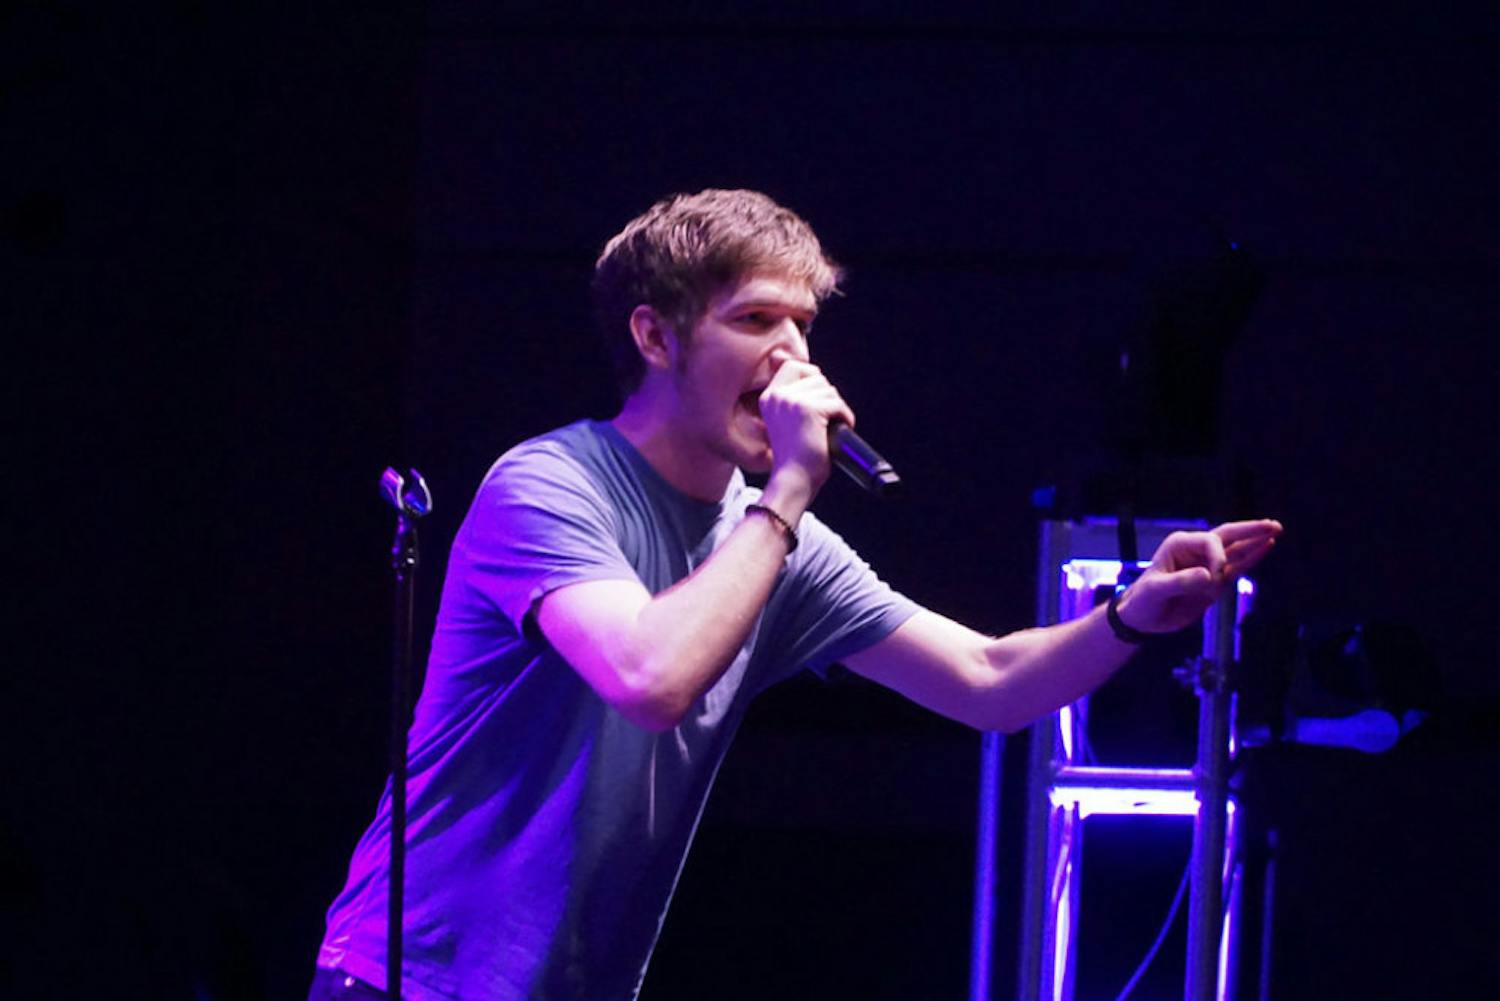 Bo Burnham performs at the Reitz Union as part of the Reitz Union Board Entertainment’s Big Orange Festival. More than 900 students came to watch the comedian on Friday night.